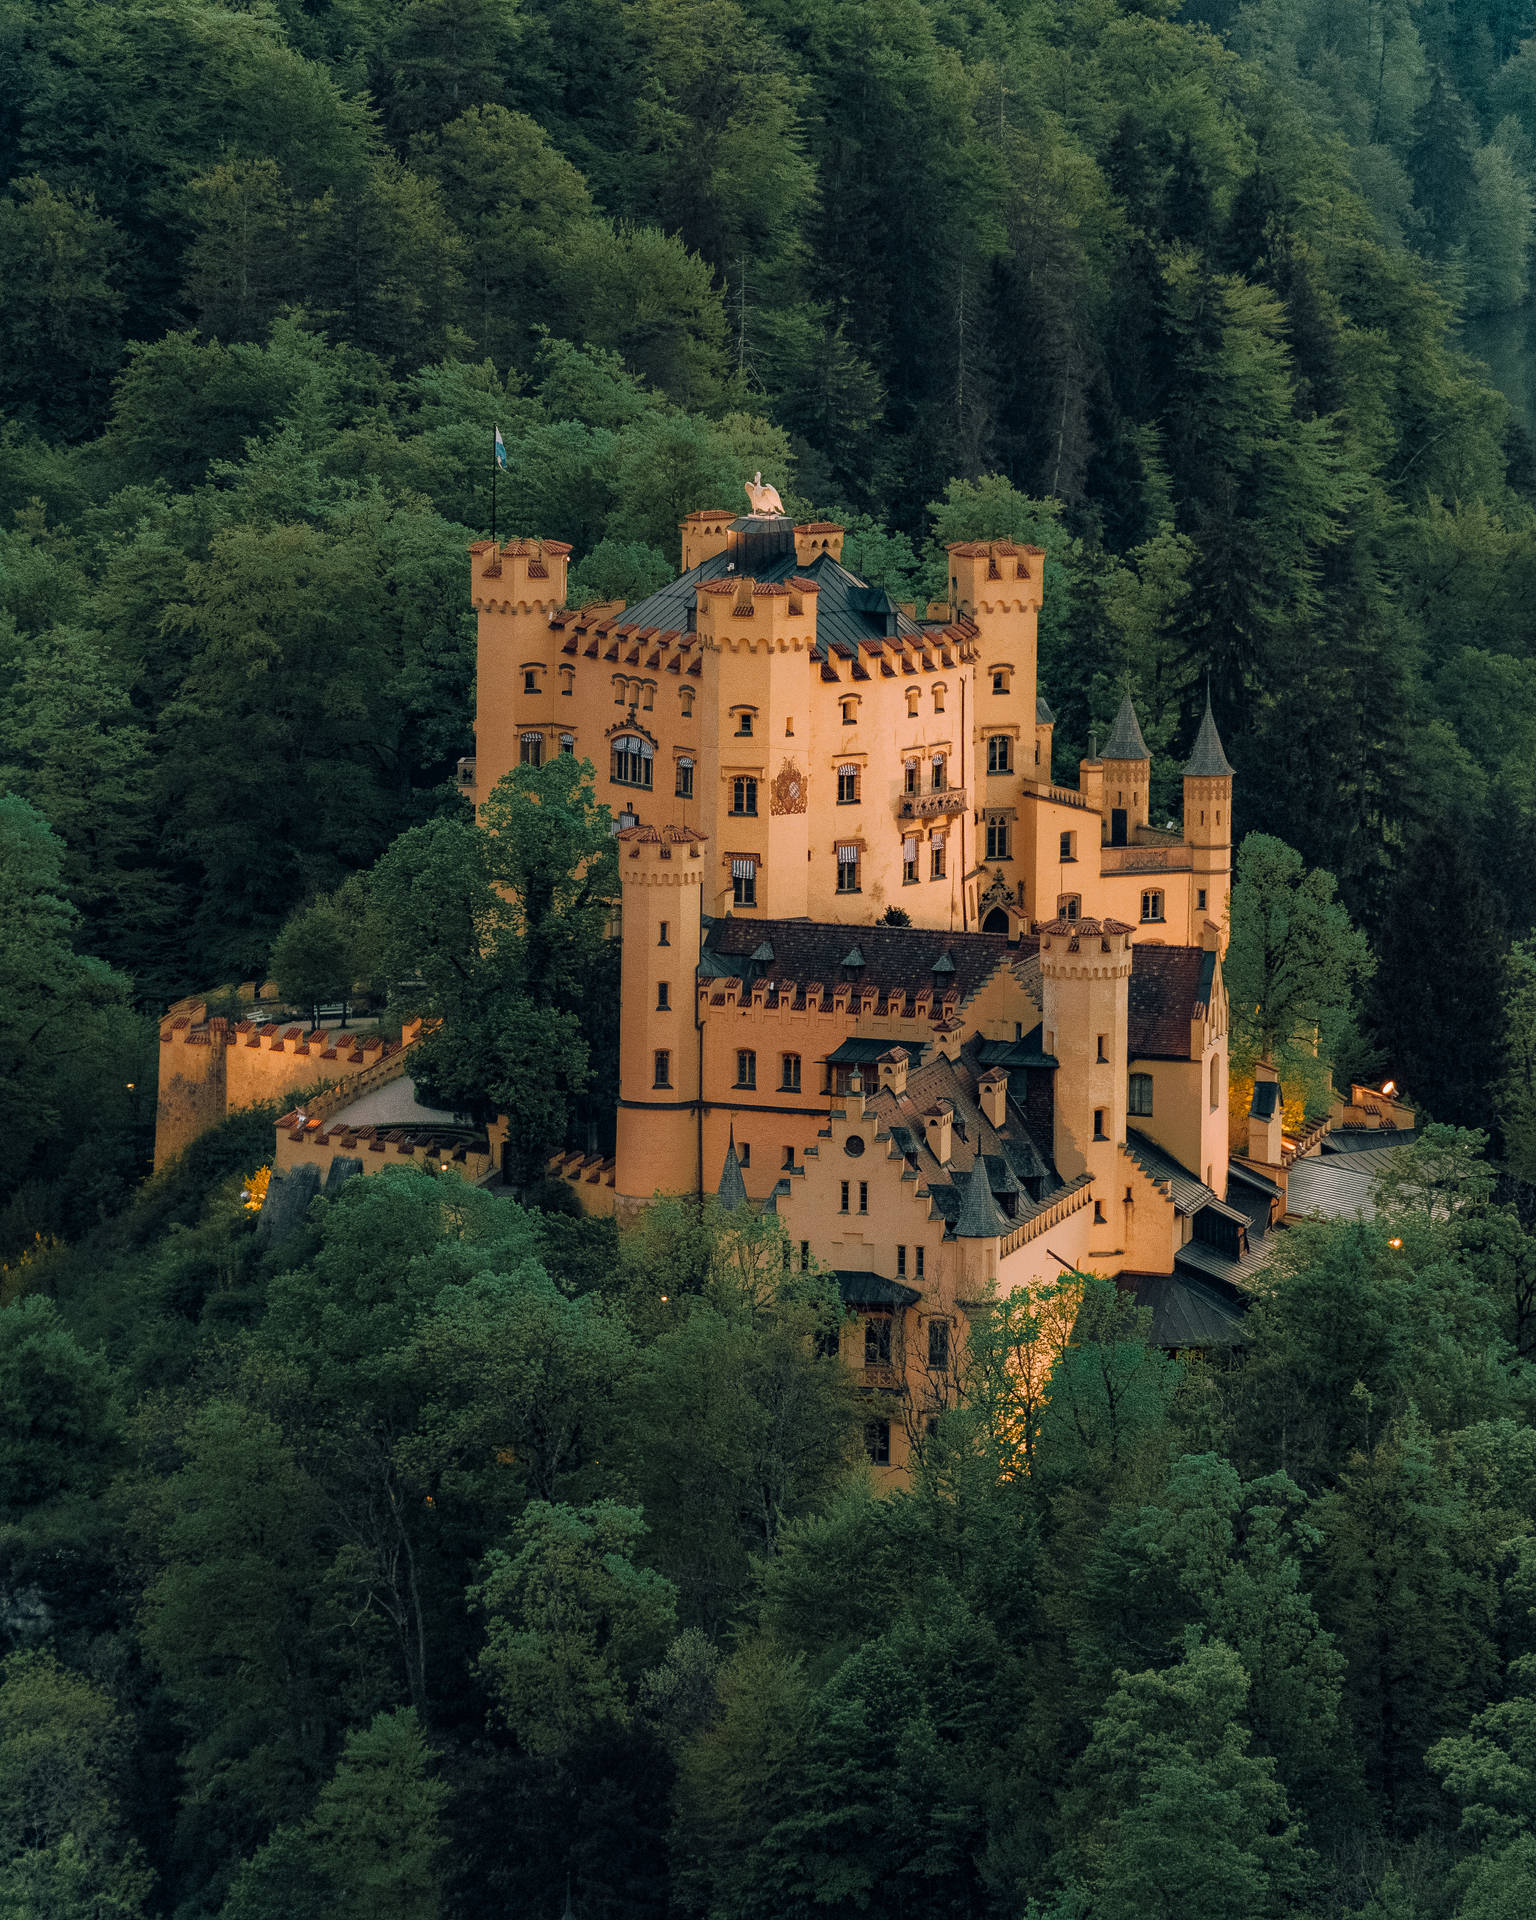 Germany's Secluded Massive Castle Wallpaper